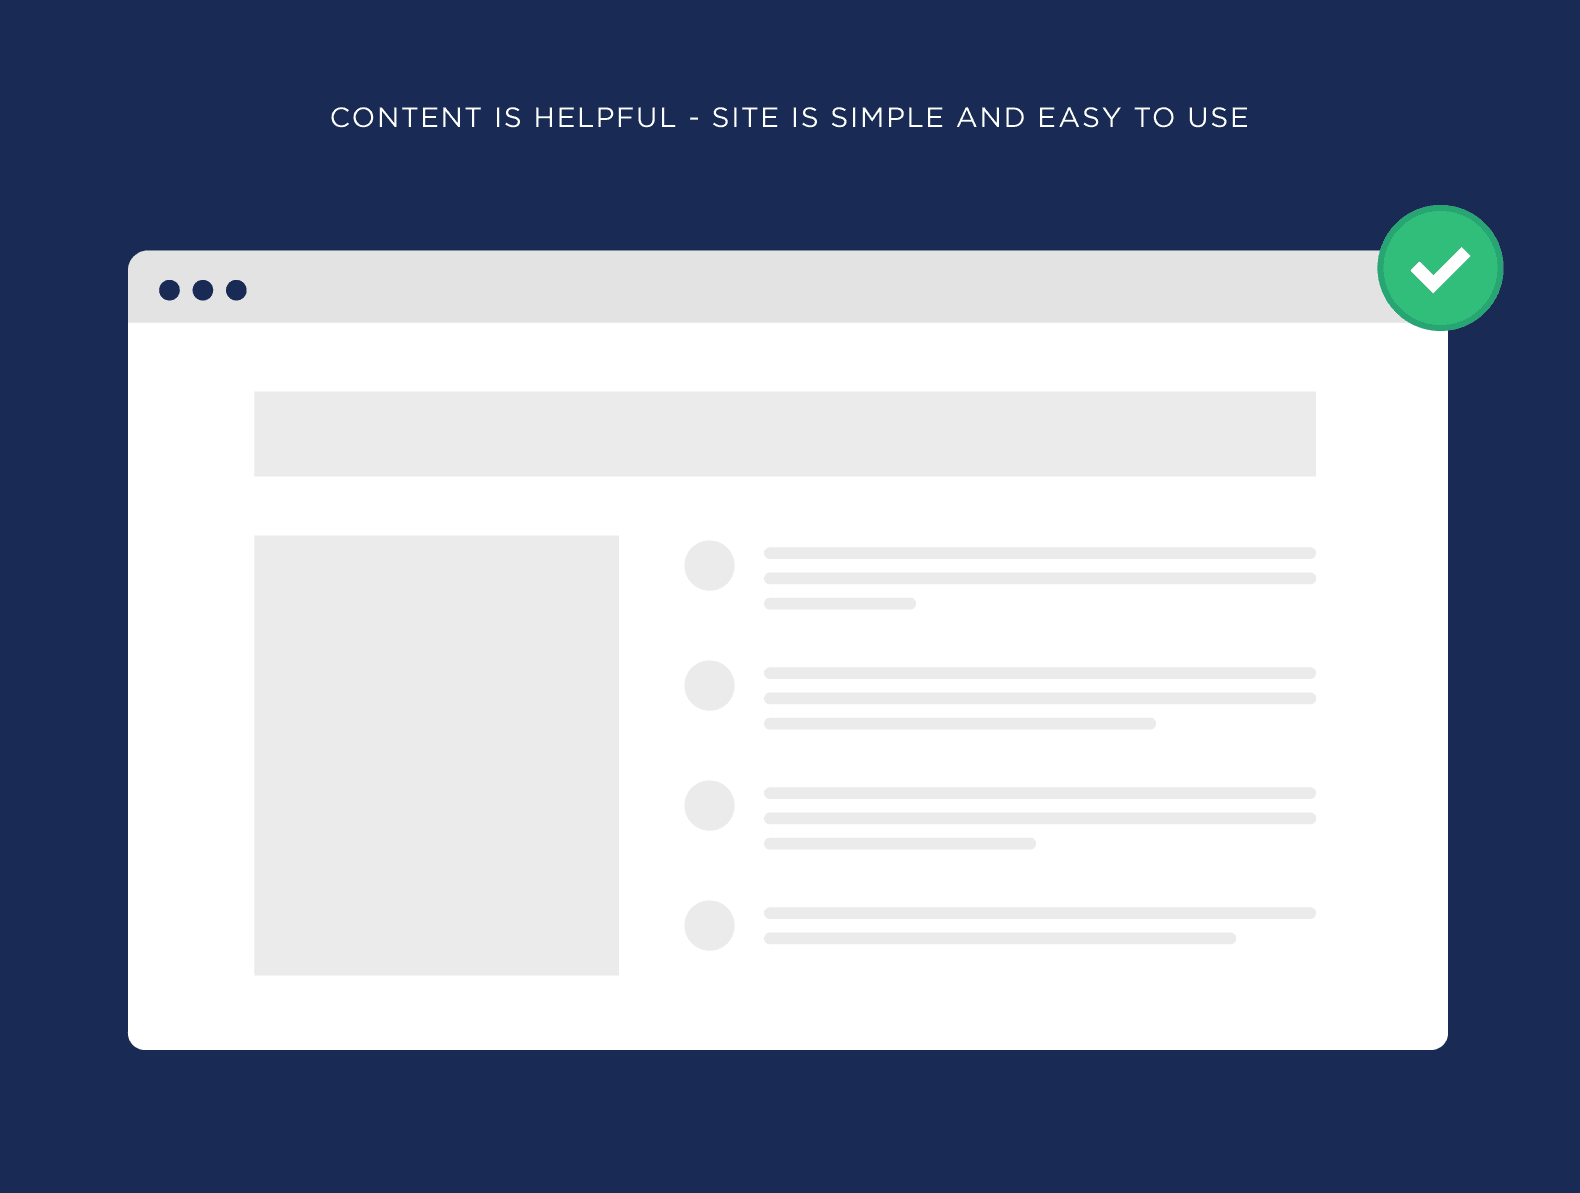 Content is helpful – Site is simple and easy to use